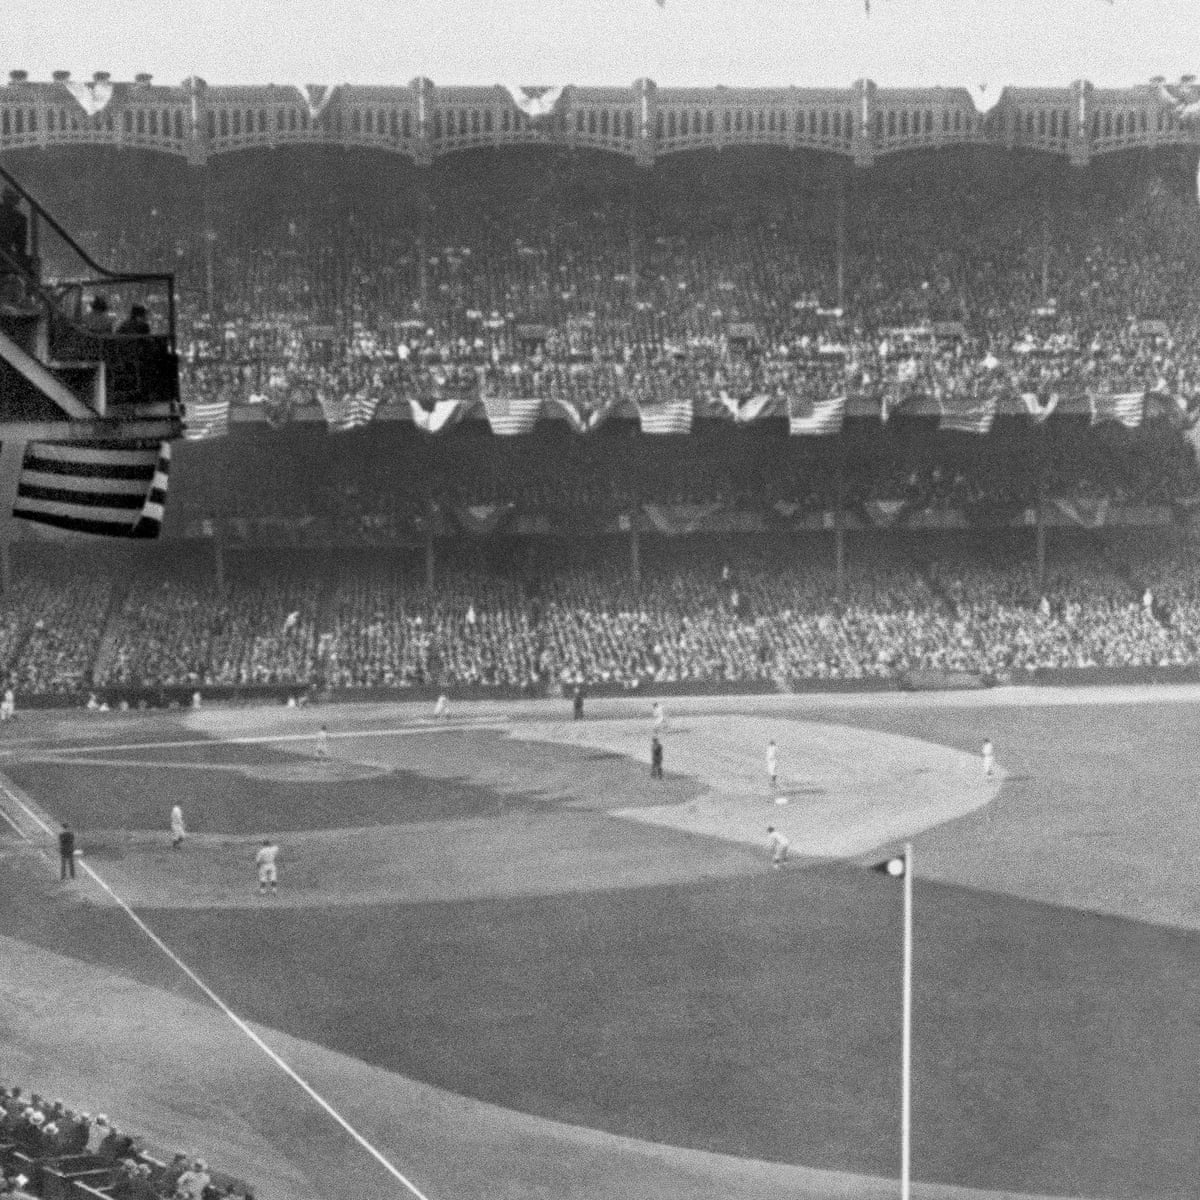 First Game, Last Out in 1927